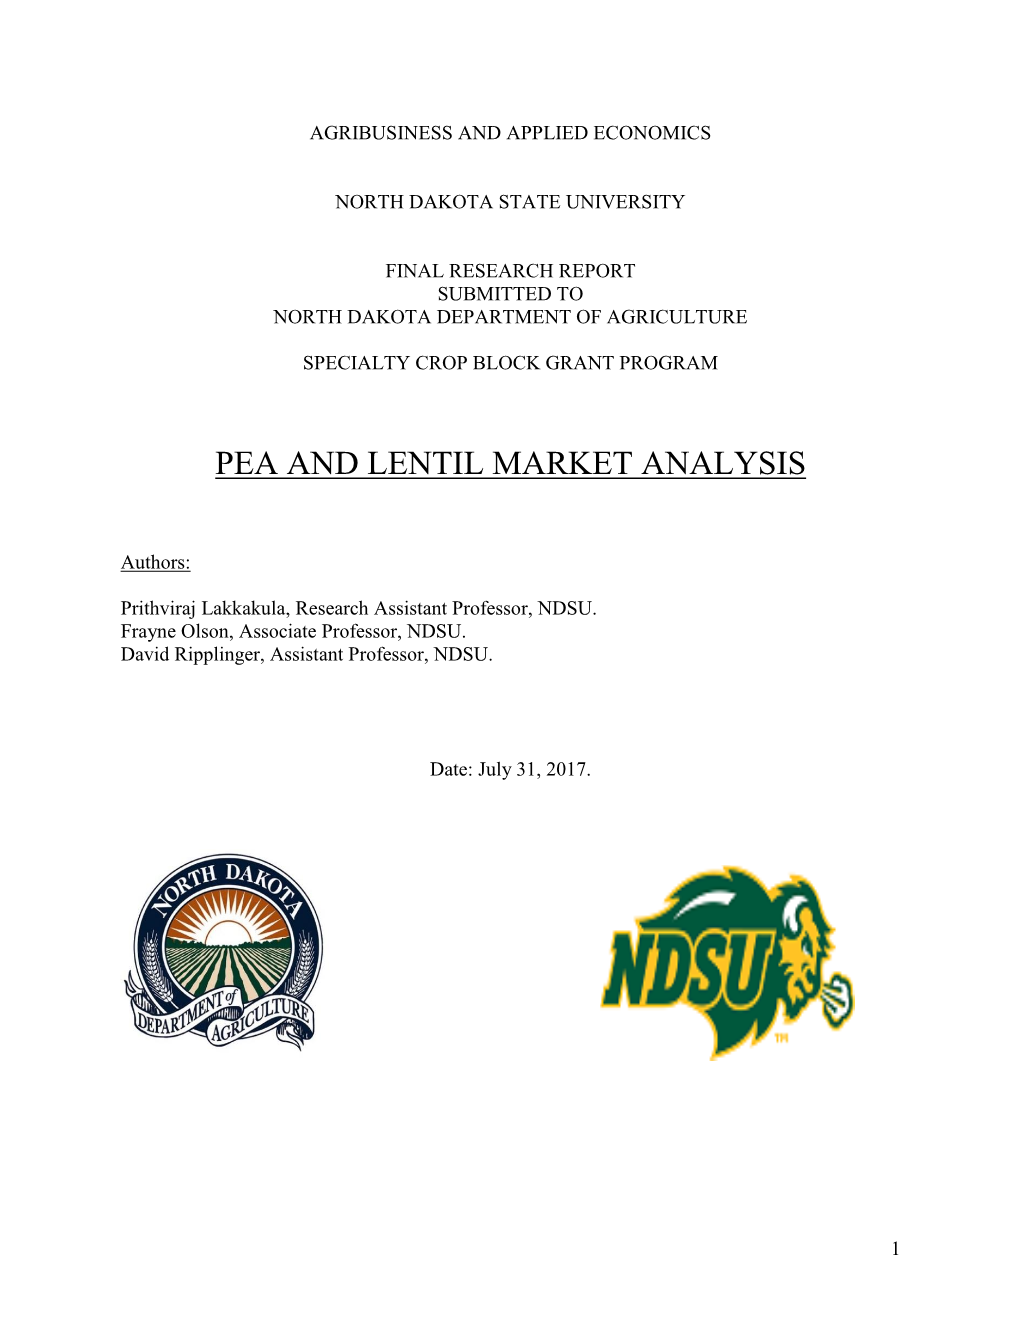 Pea and Lentil Market Analysis